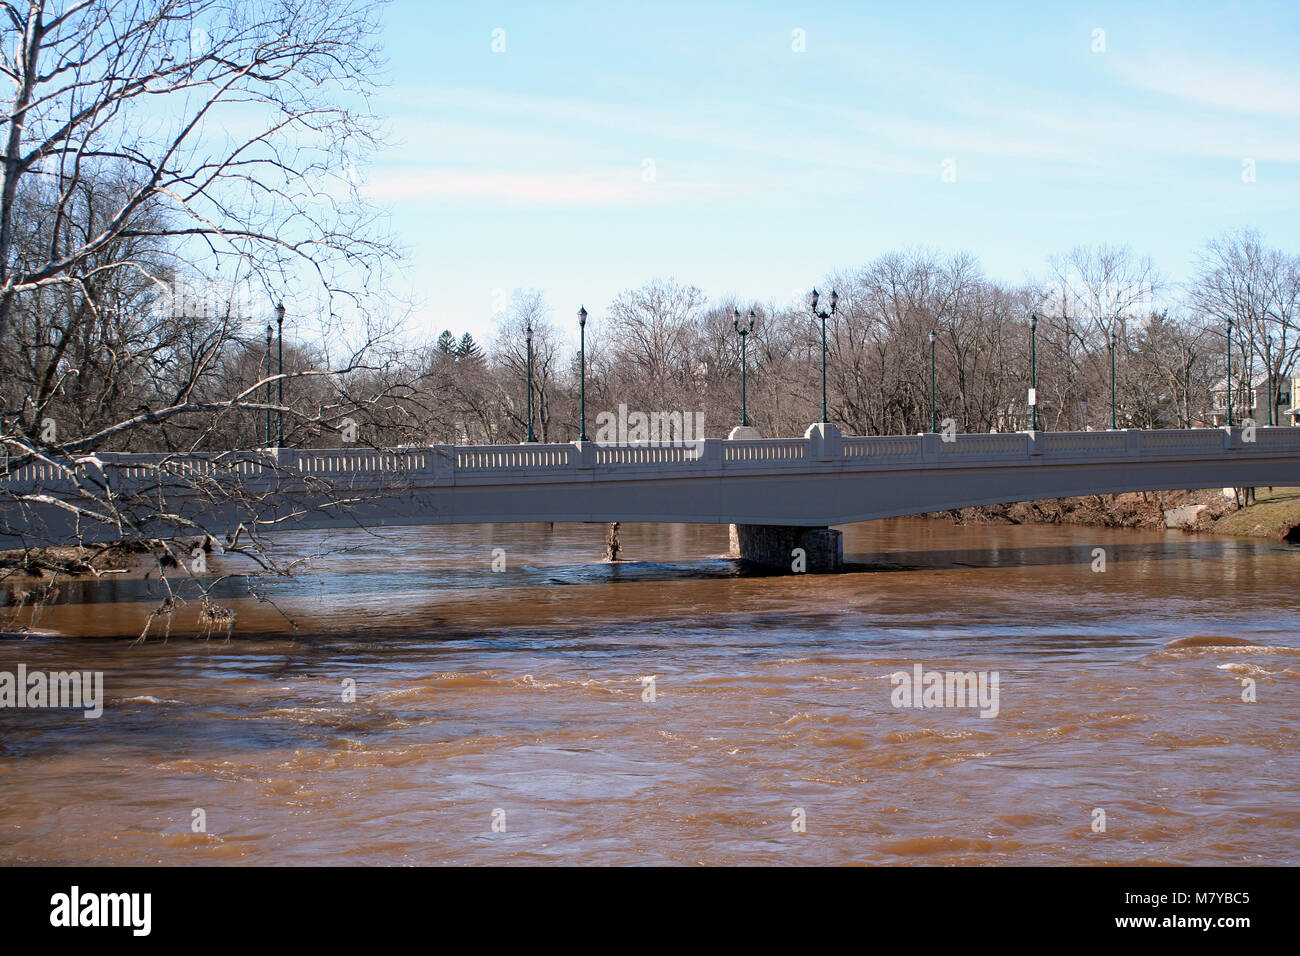 A Bridge over rising flood waters Stock Photo